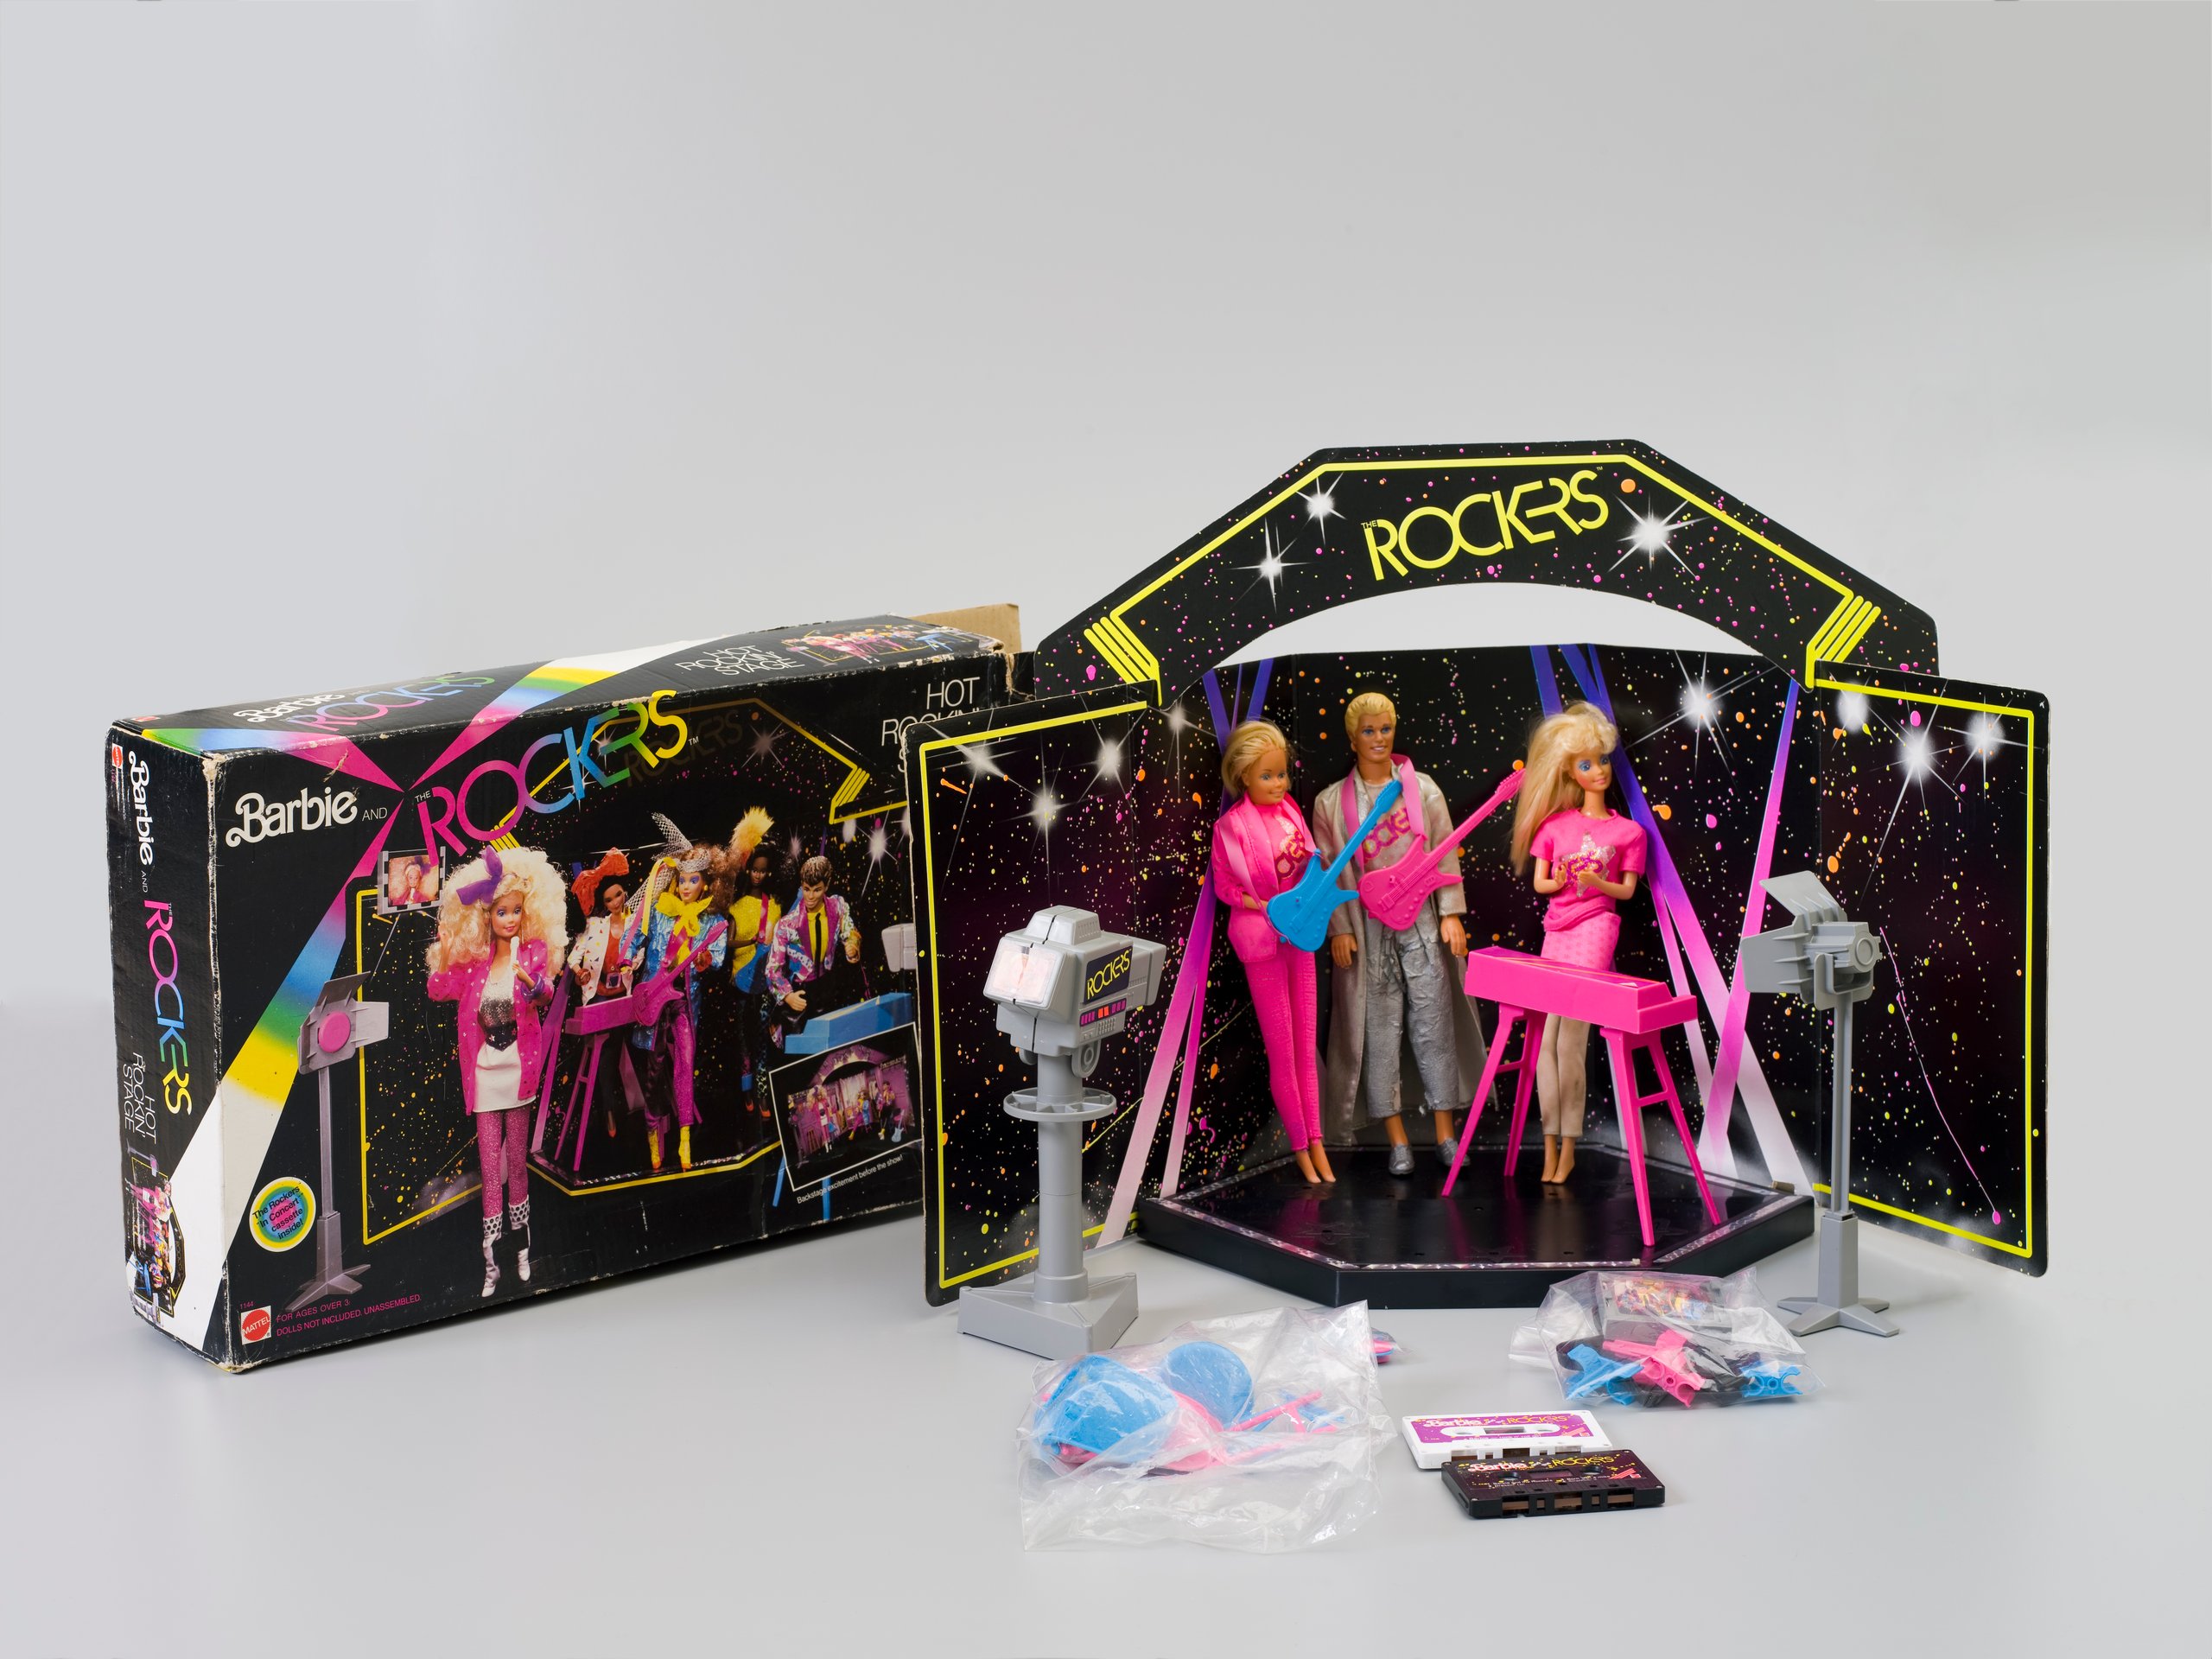 'Barbie and the Rockers' doll playset